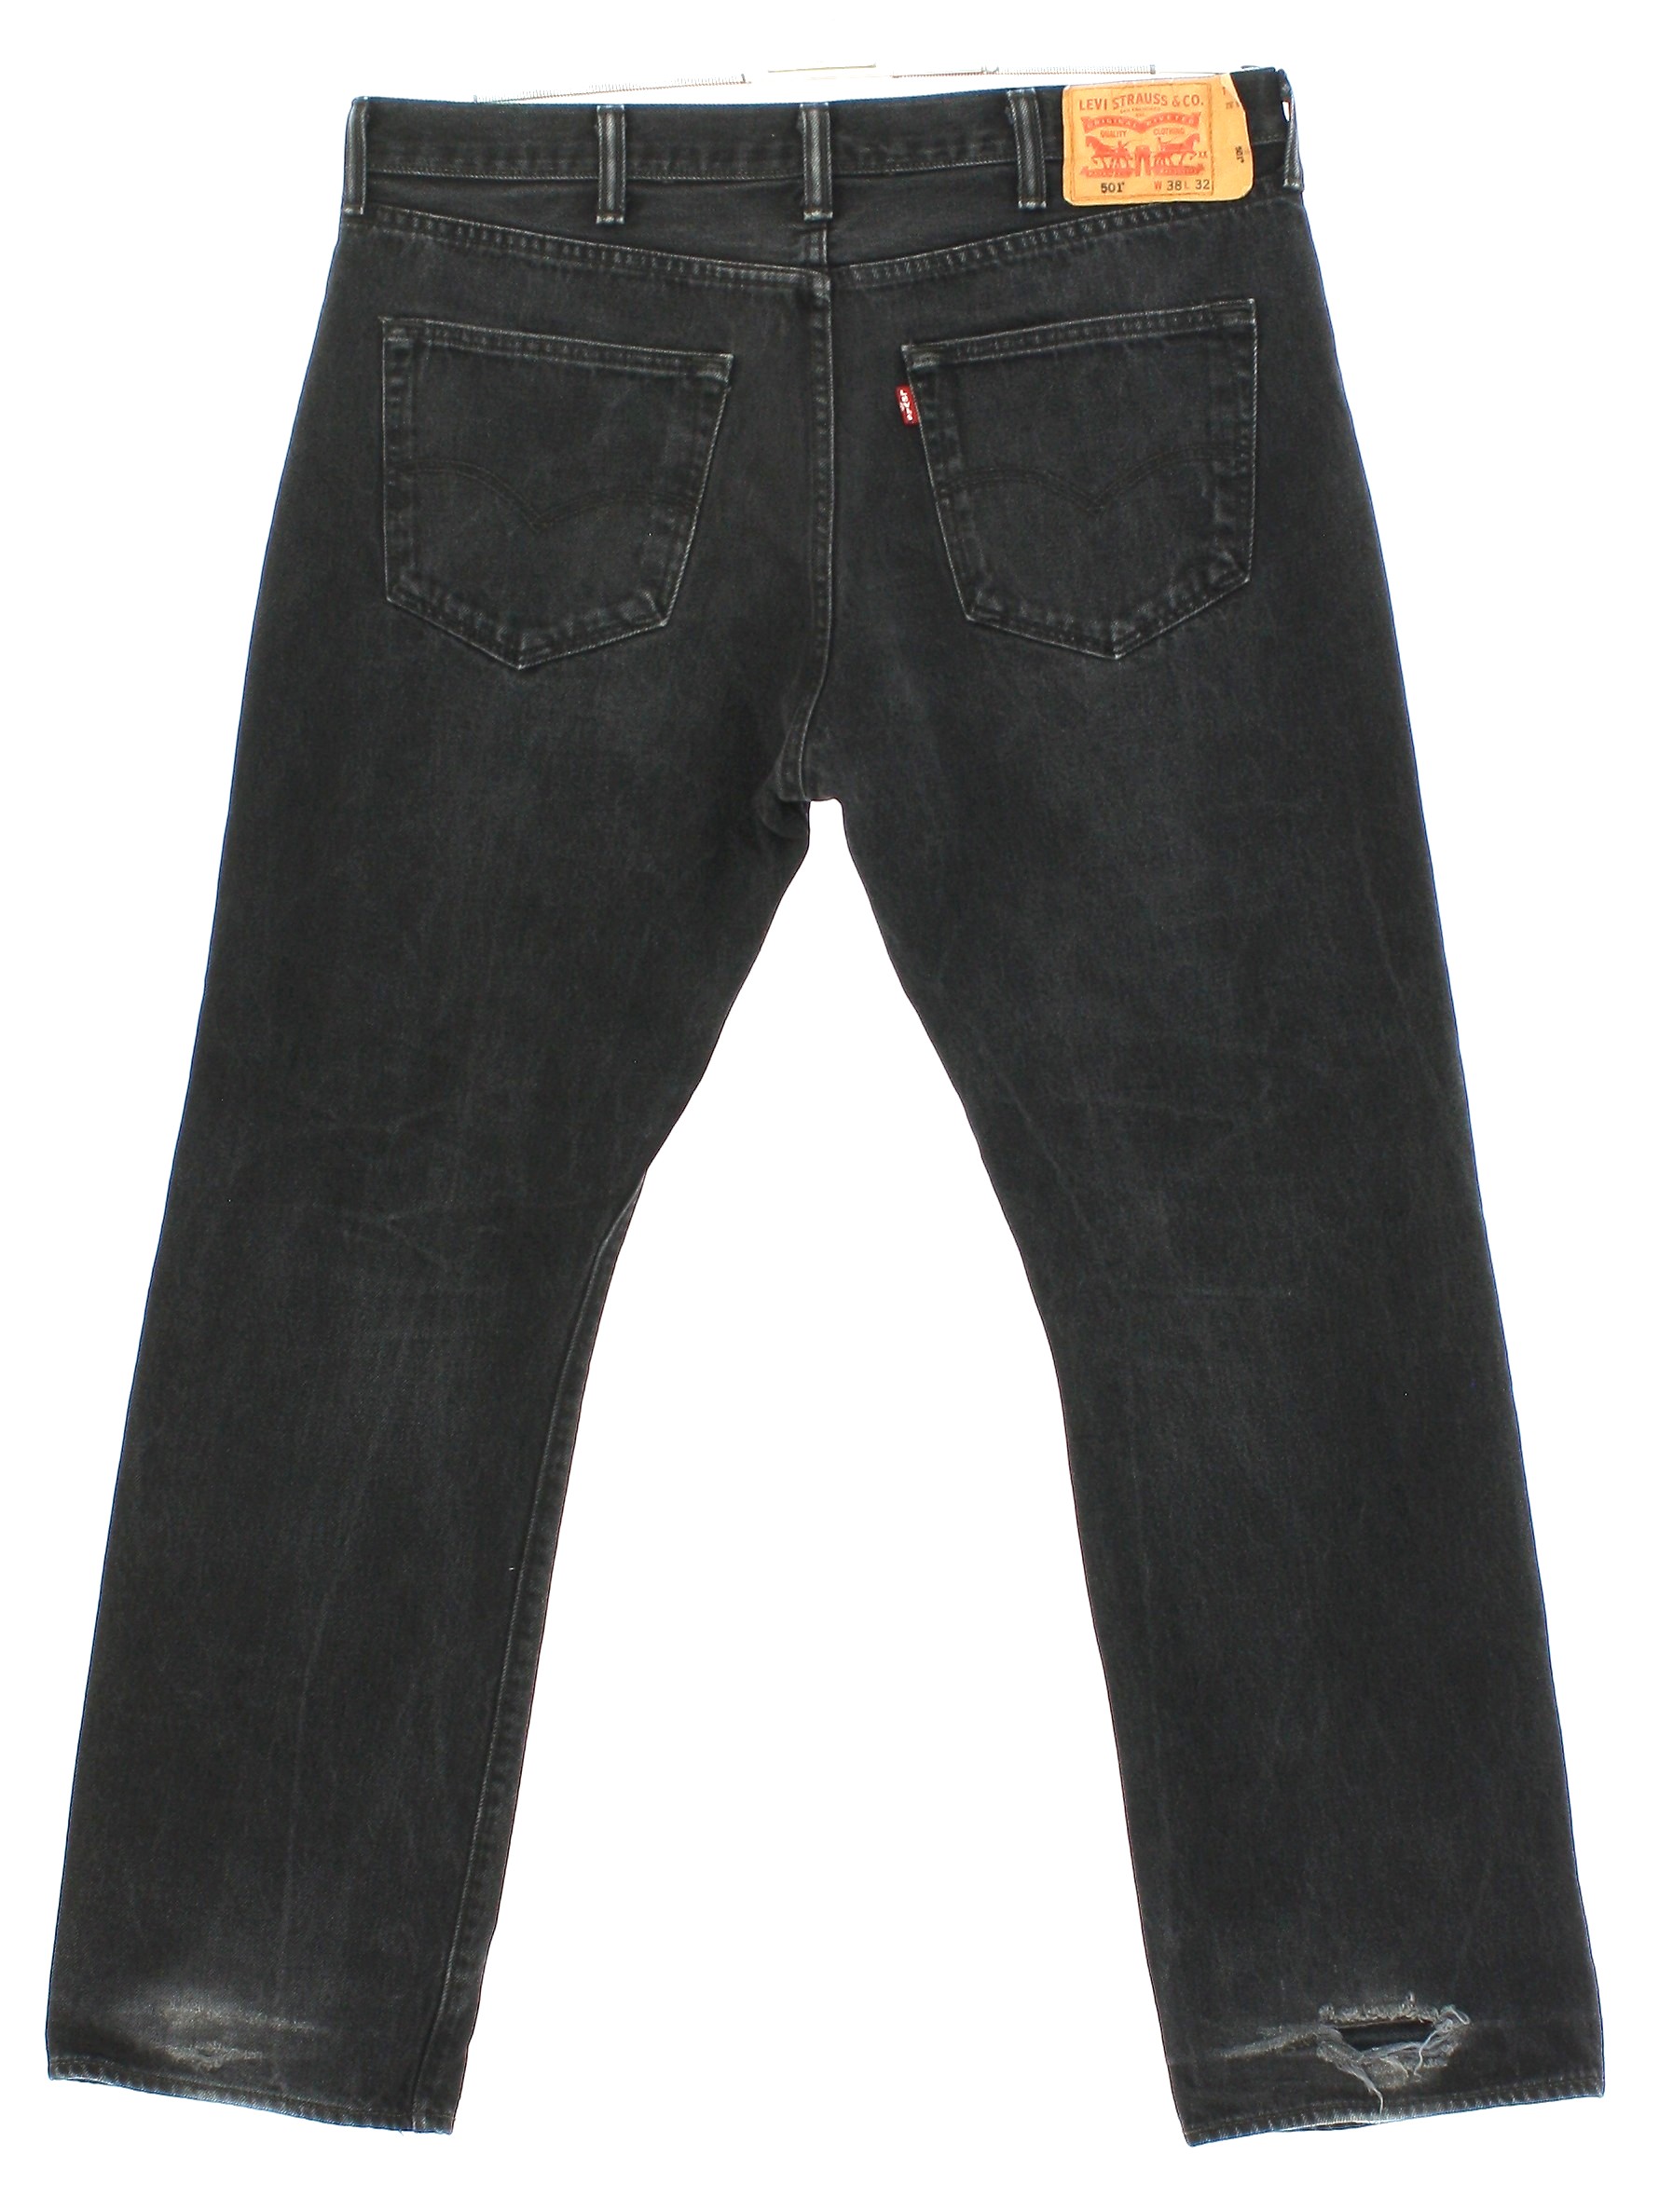 Pants: 90s -Levis 501- Mens slightly faded and worn colors cotton denim ...